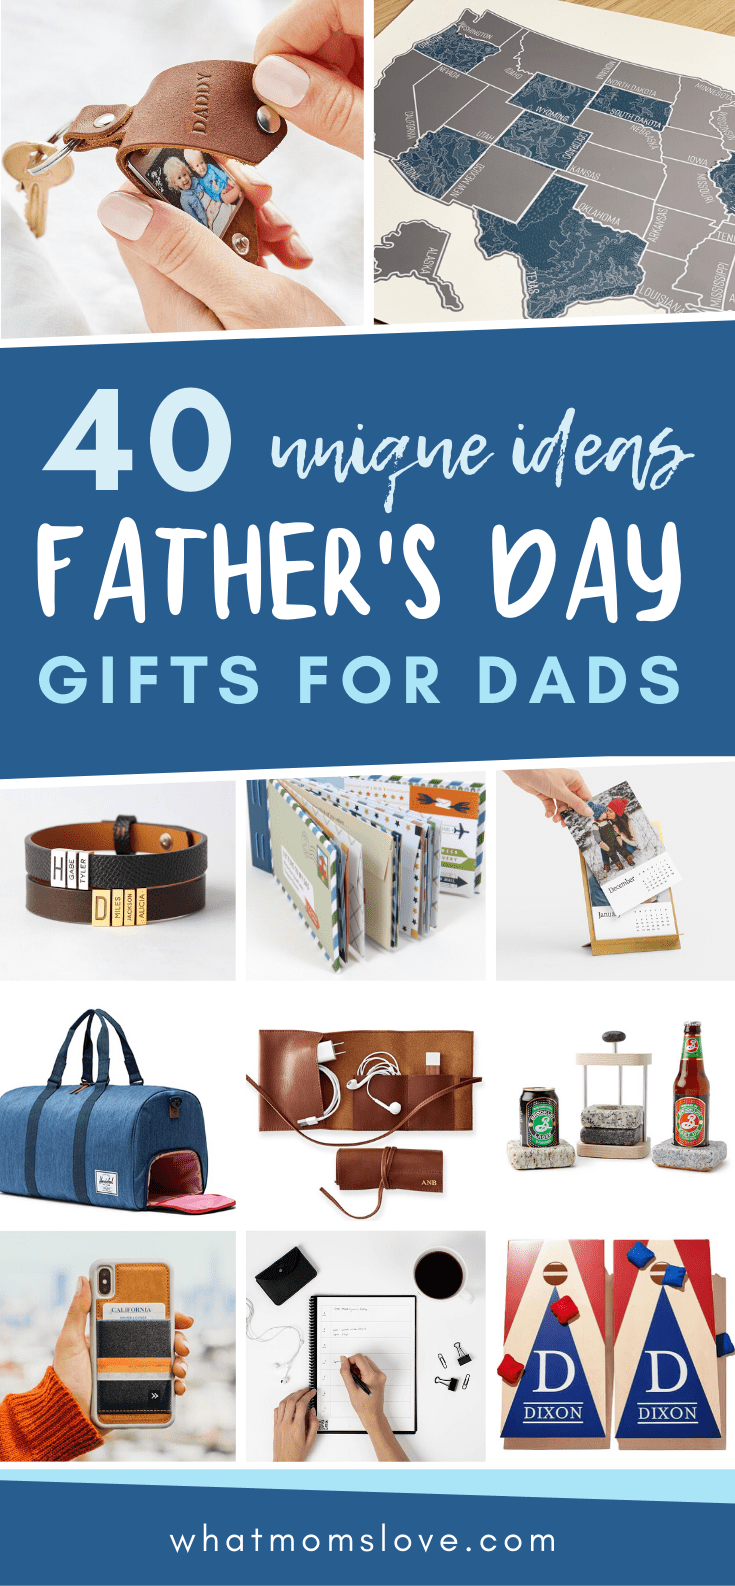 Fathers Day Unique Gift Ideas for Dad